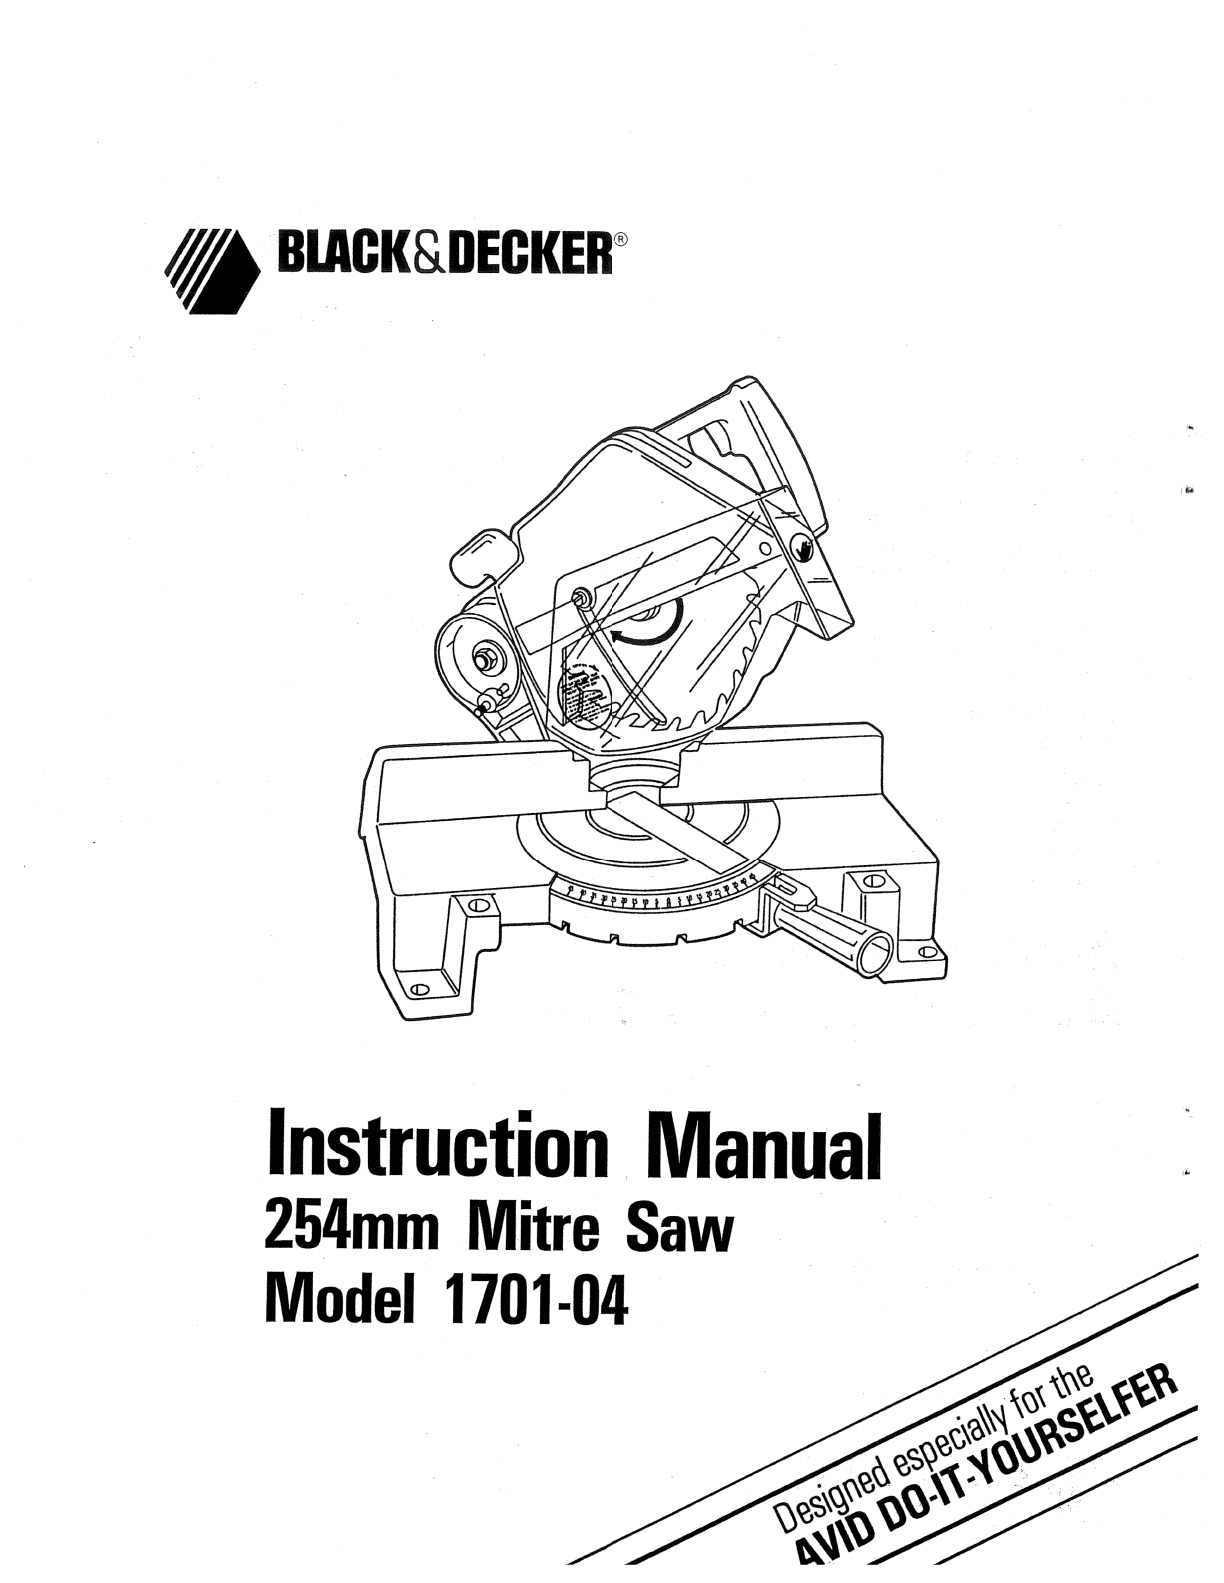 User manual Black & Decker RC516 (English - 60 pages)